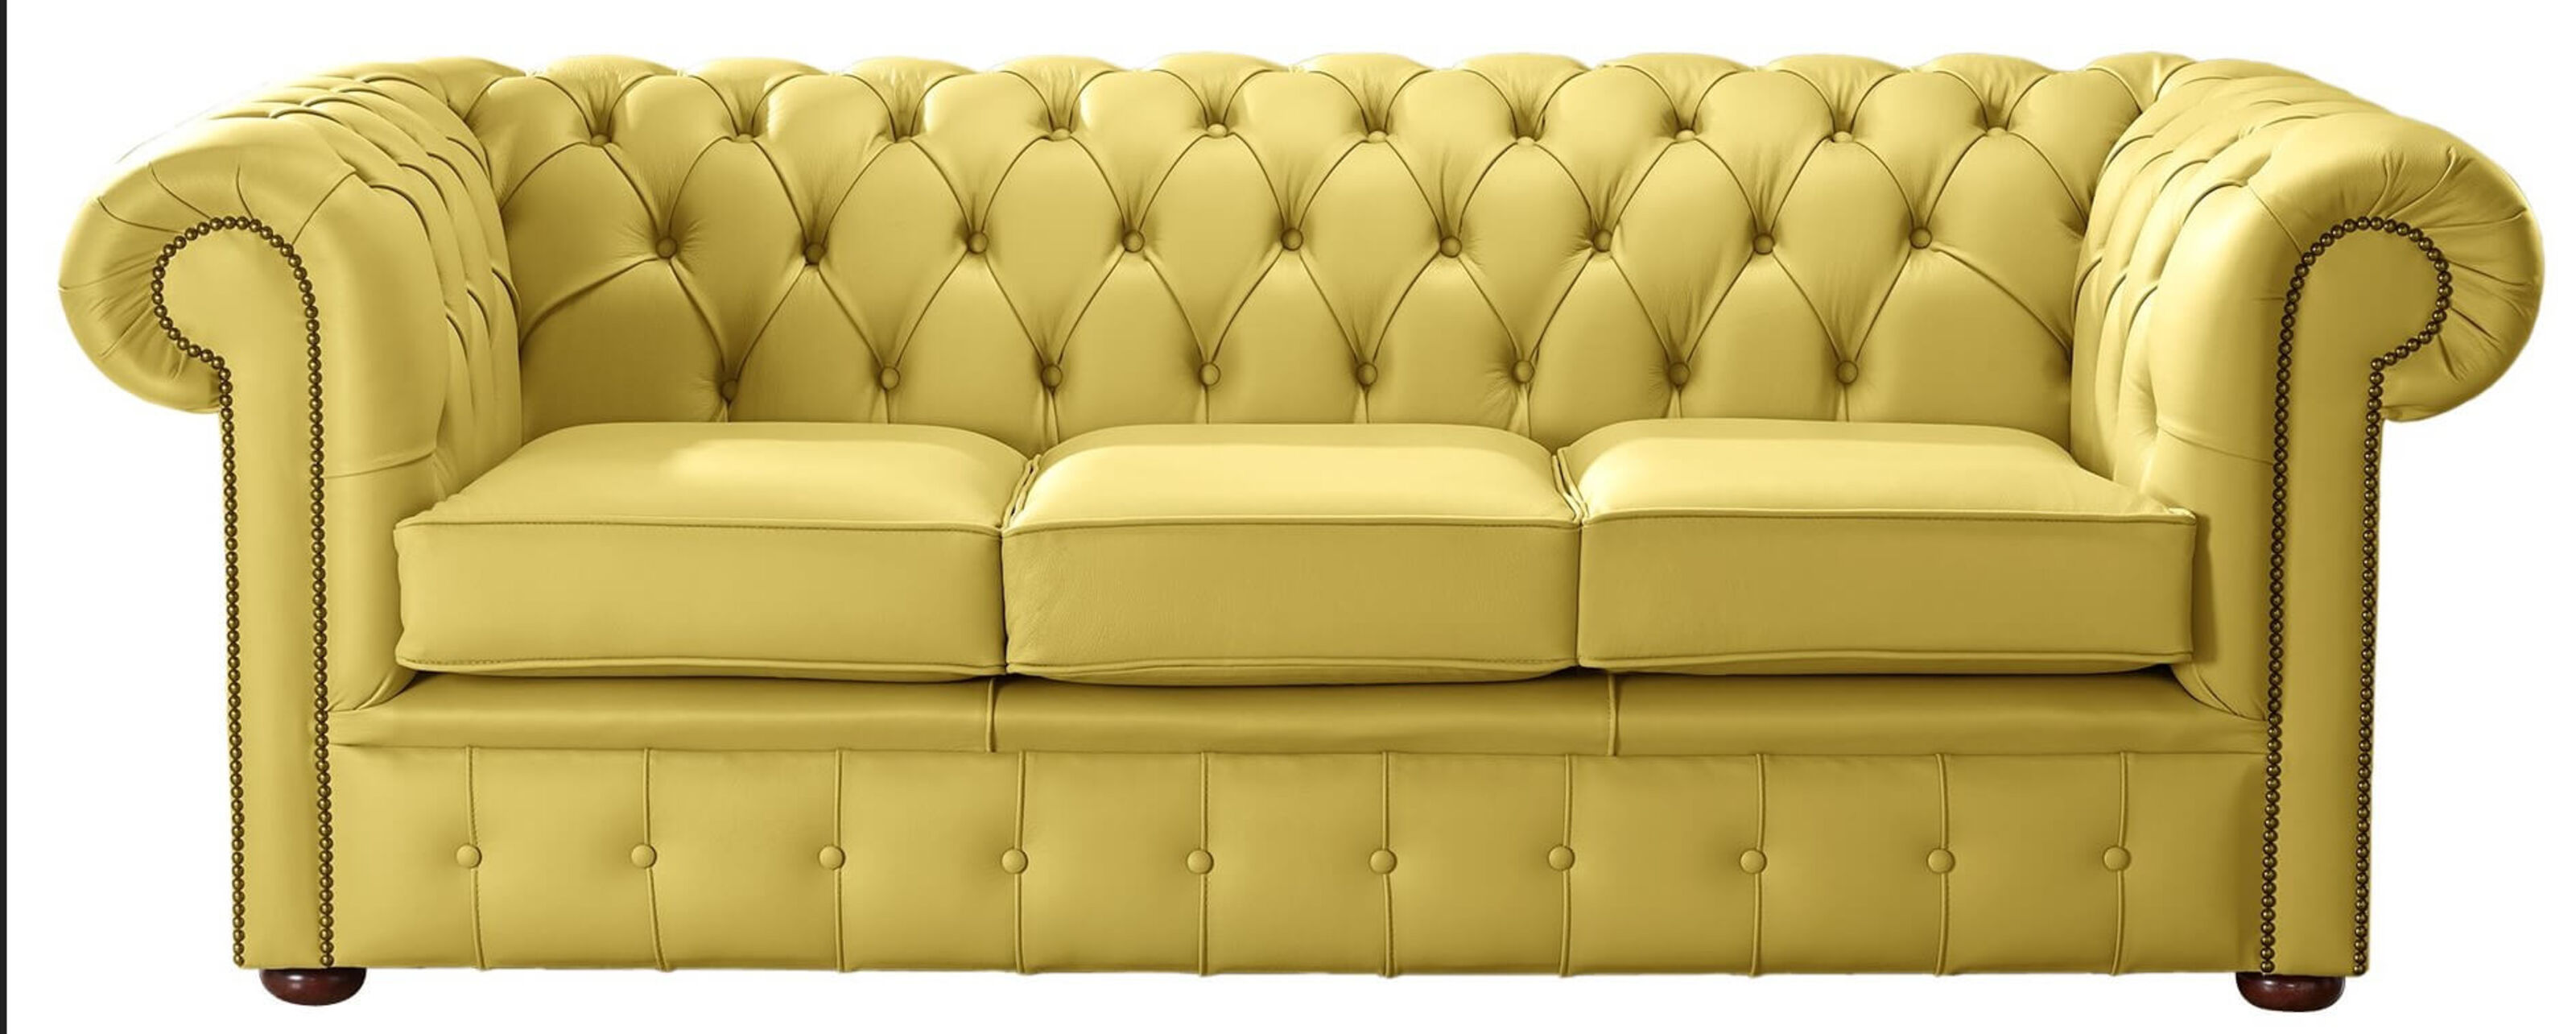 Elevate Your Living Room with a Stunning Leather Chesterfield Sofa  %Post Title